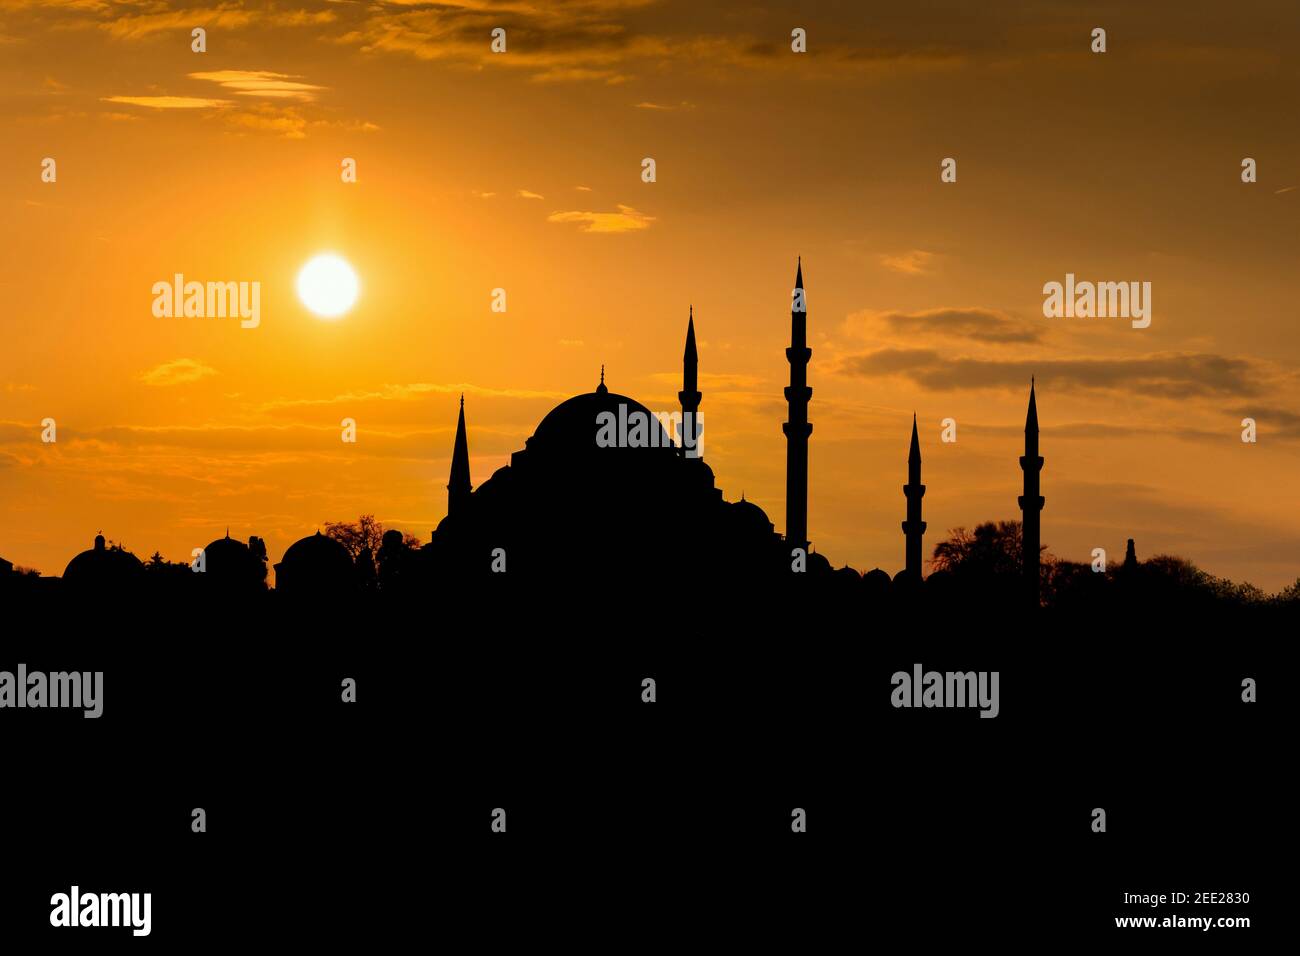 Sunset sky over Istanbul mosques. Turkey. Stock Photo